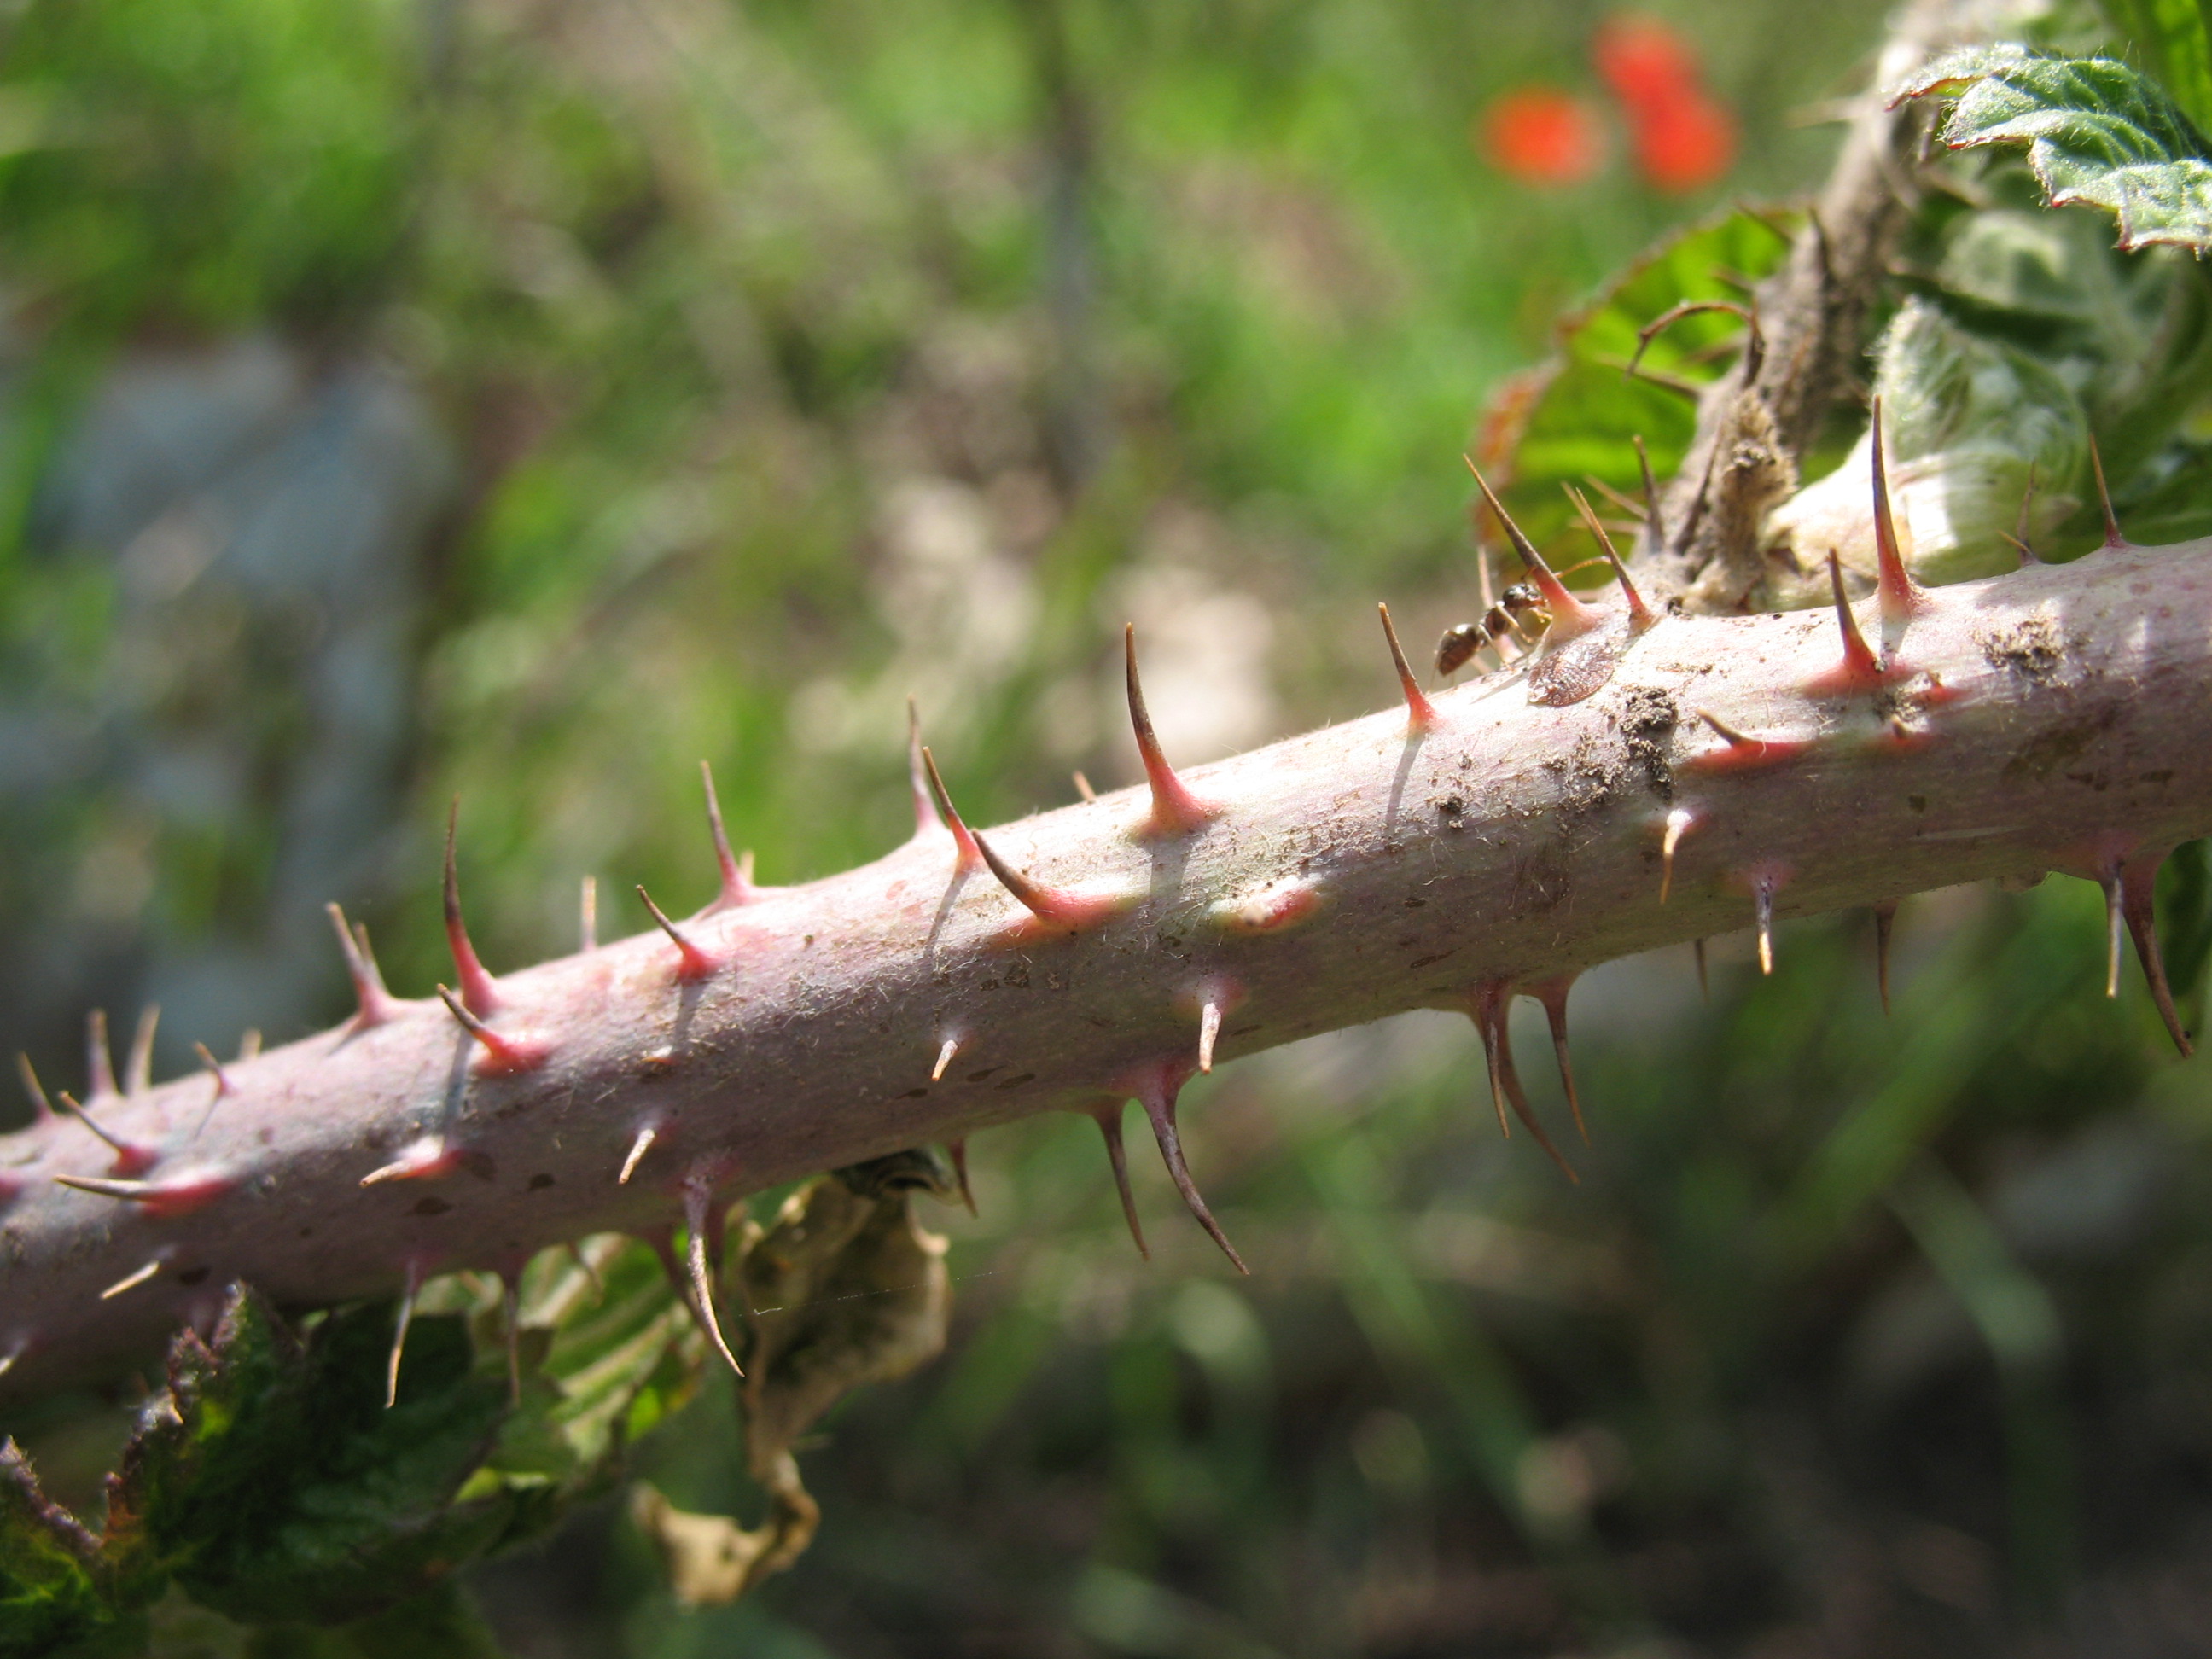 14 plants. SP.Spines. Crown of Thorns. Thorn. Spines.